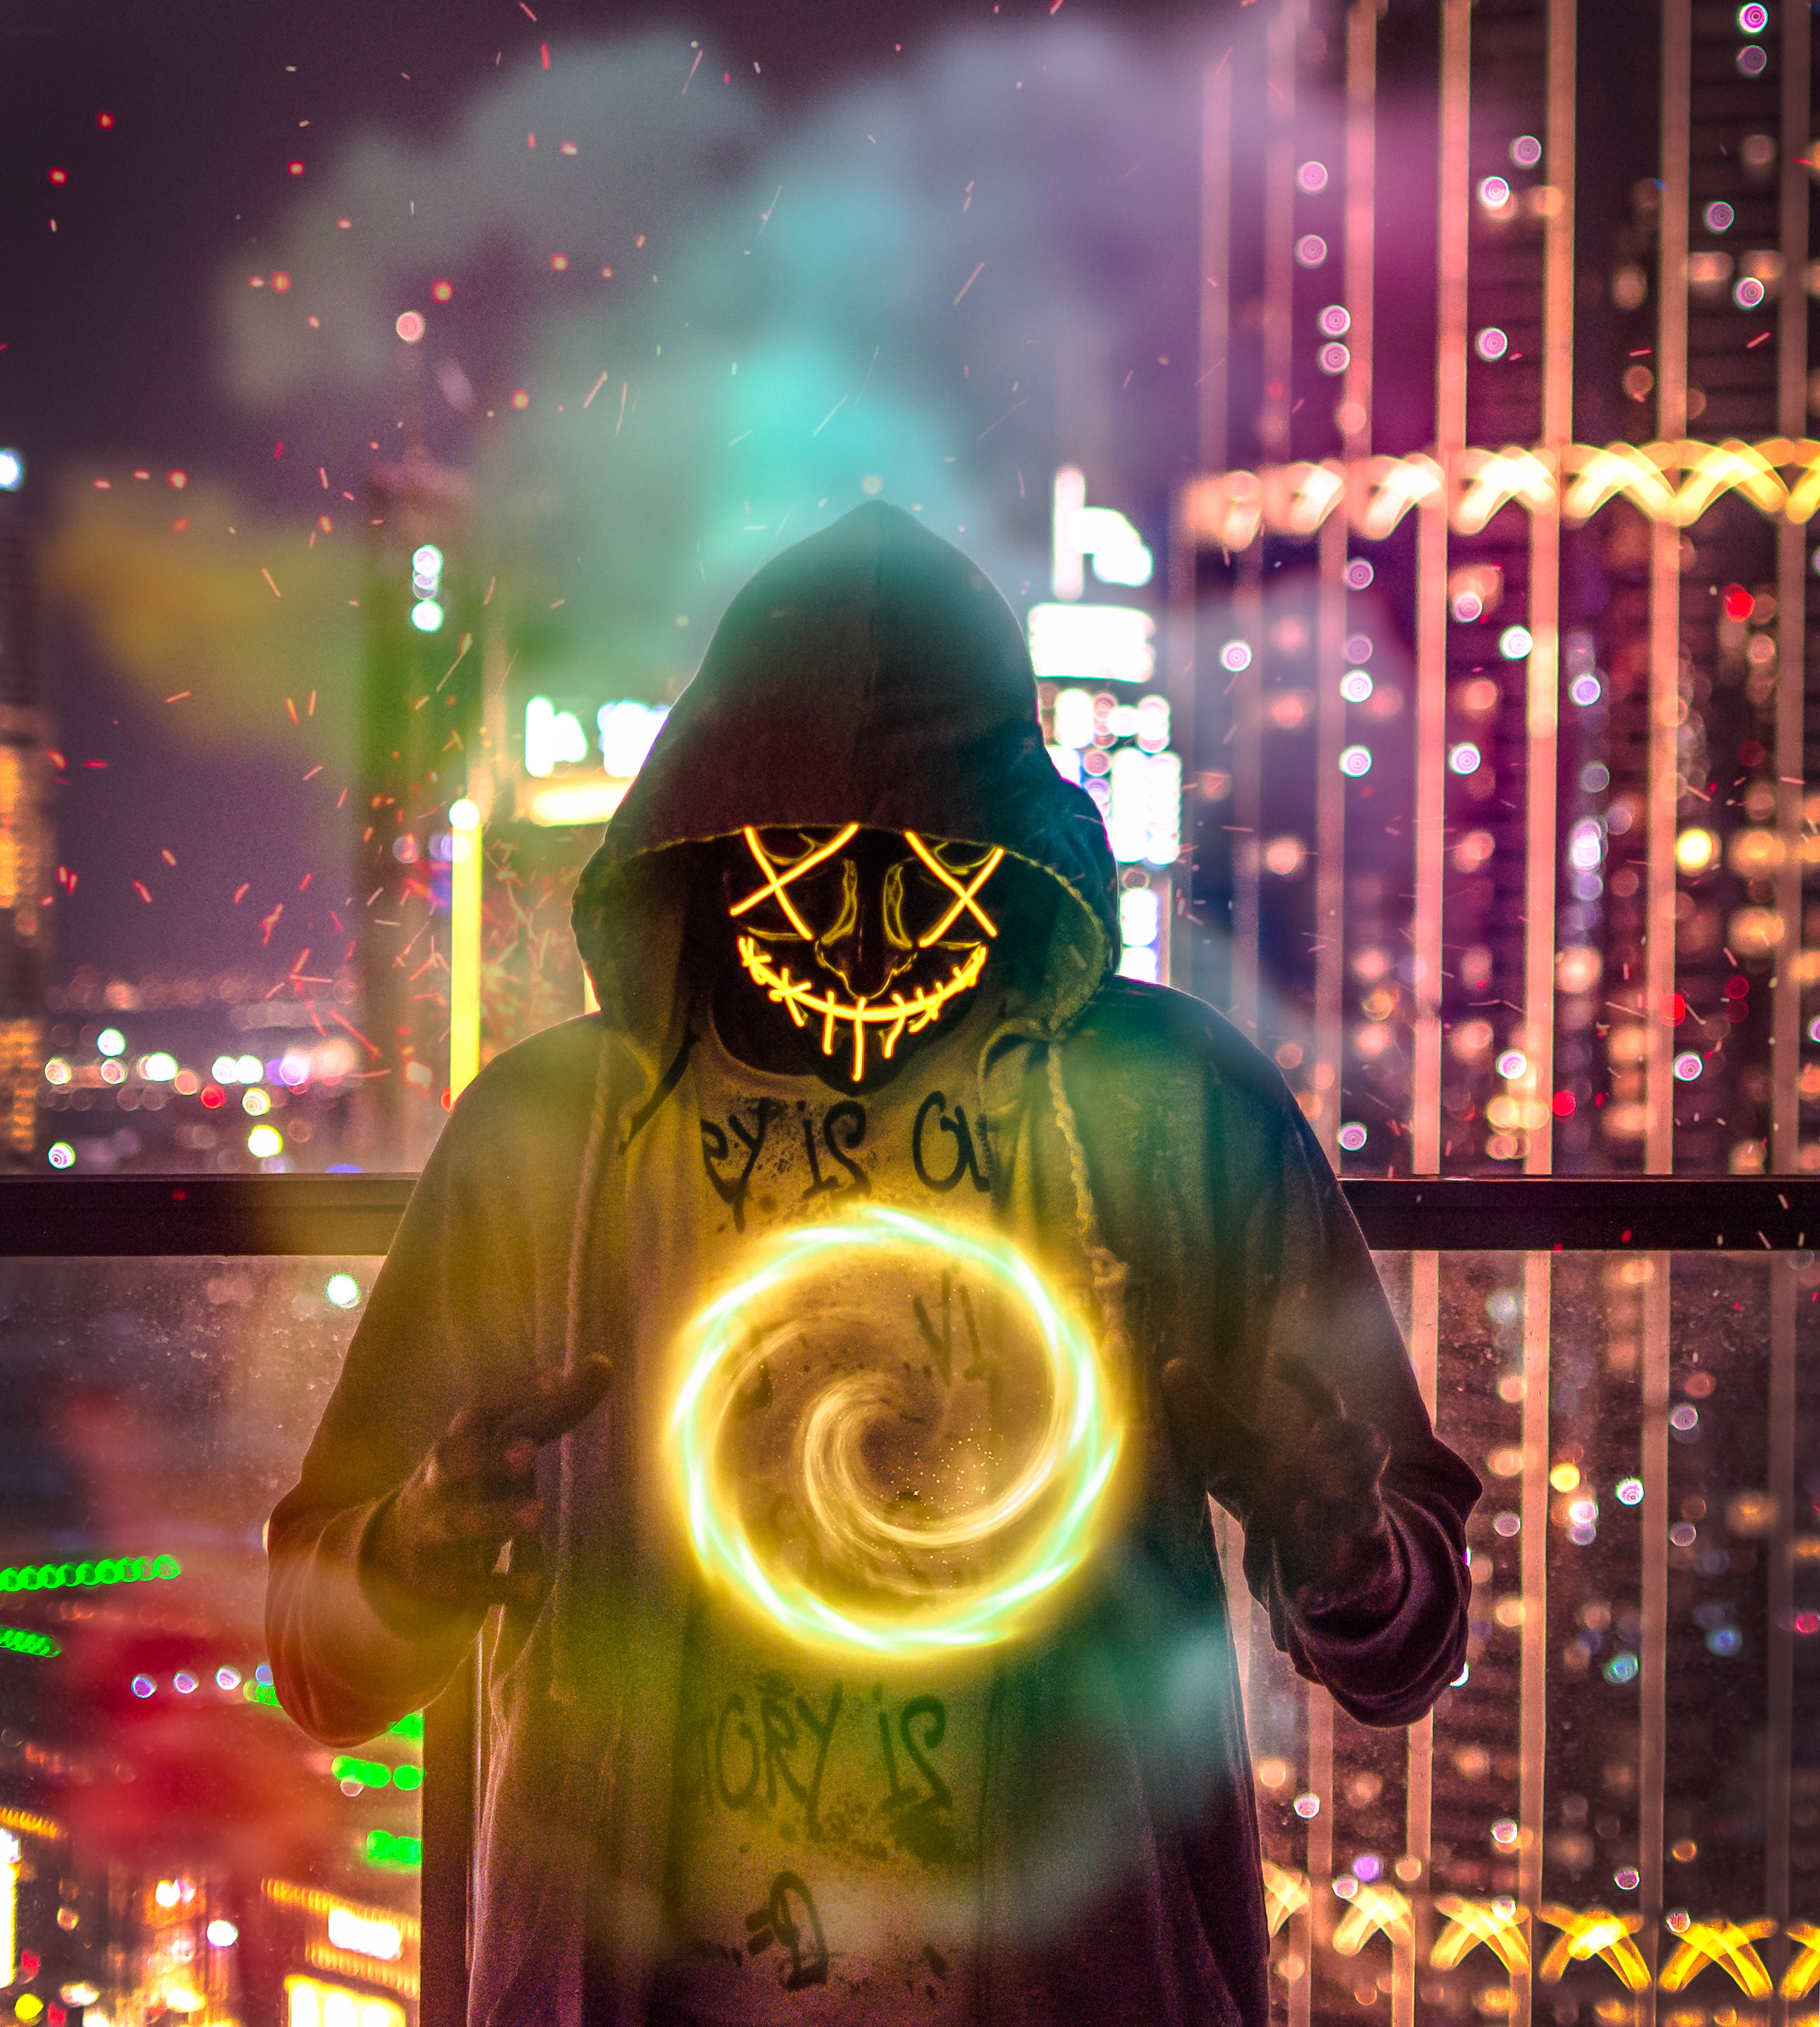 fire, magic, miscellanea, miscellaneous, ball, mask, hood wallpapers for tablet